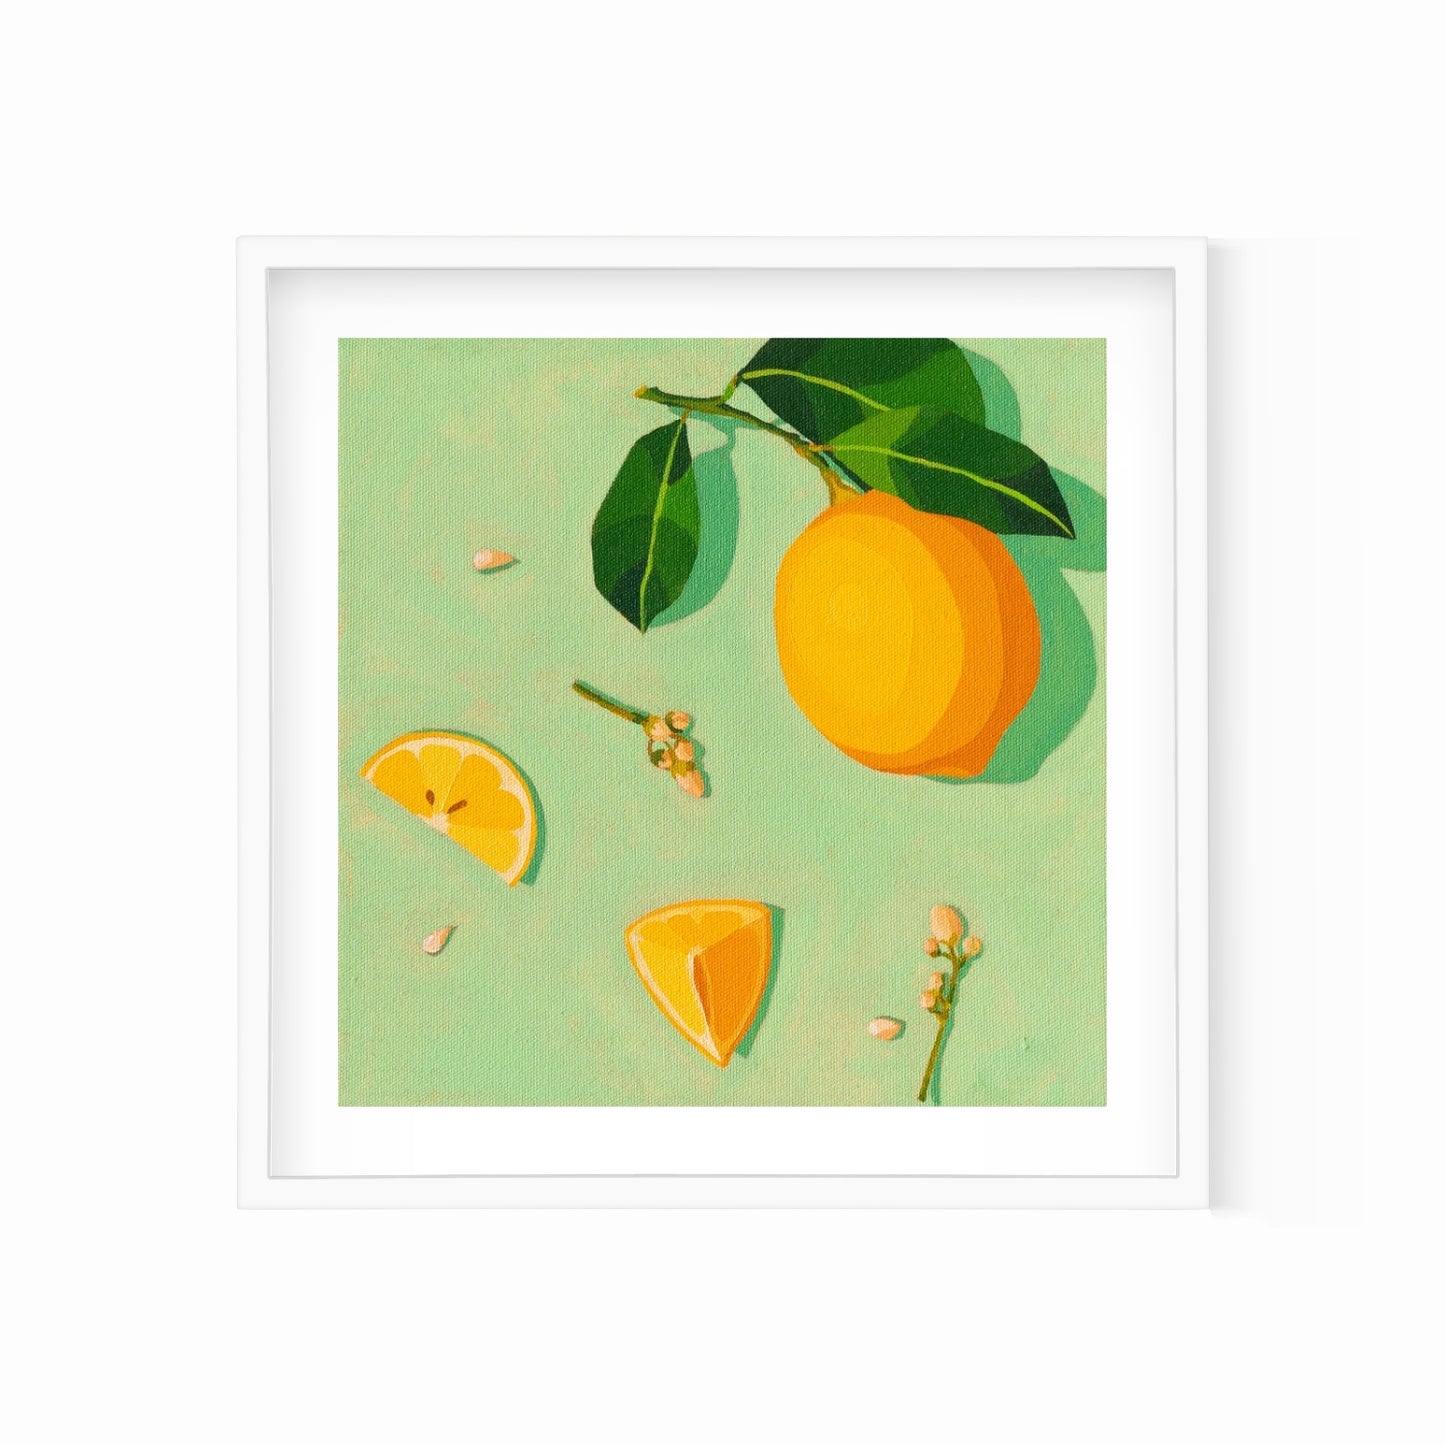 fine art print of a colorful and modern original oil painting of bright yellow lemons on aacqua green background with strong shadows